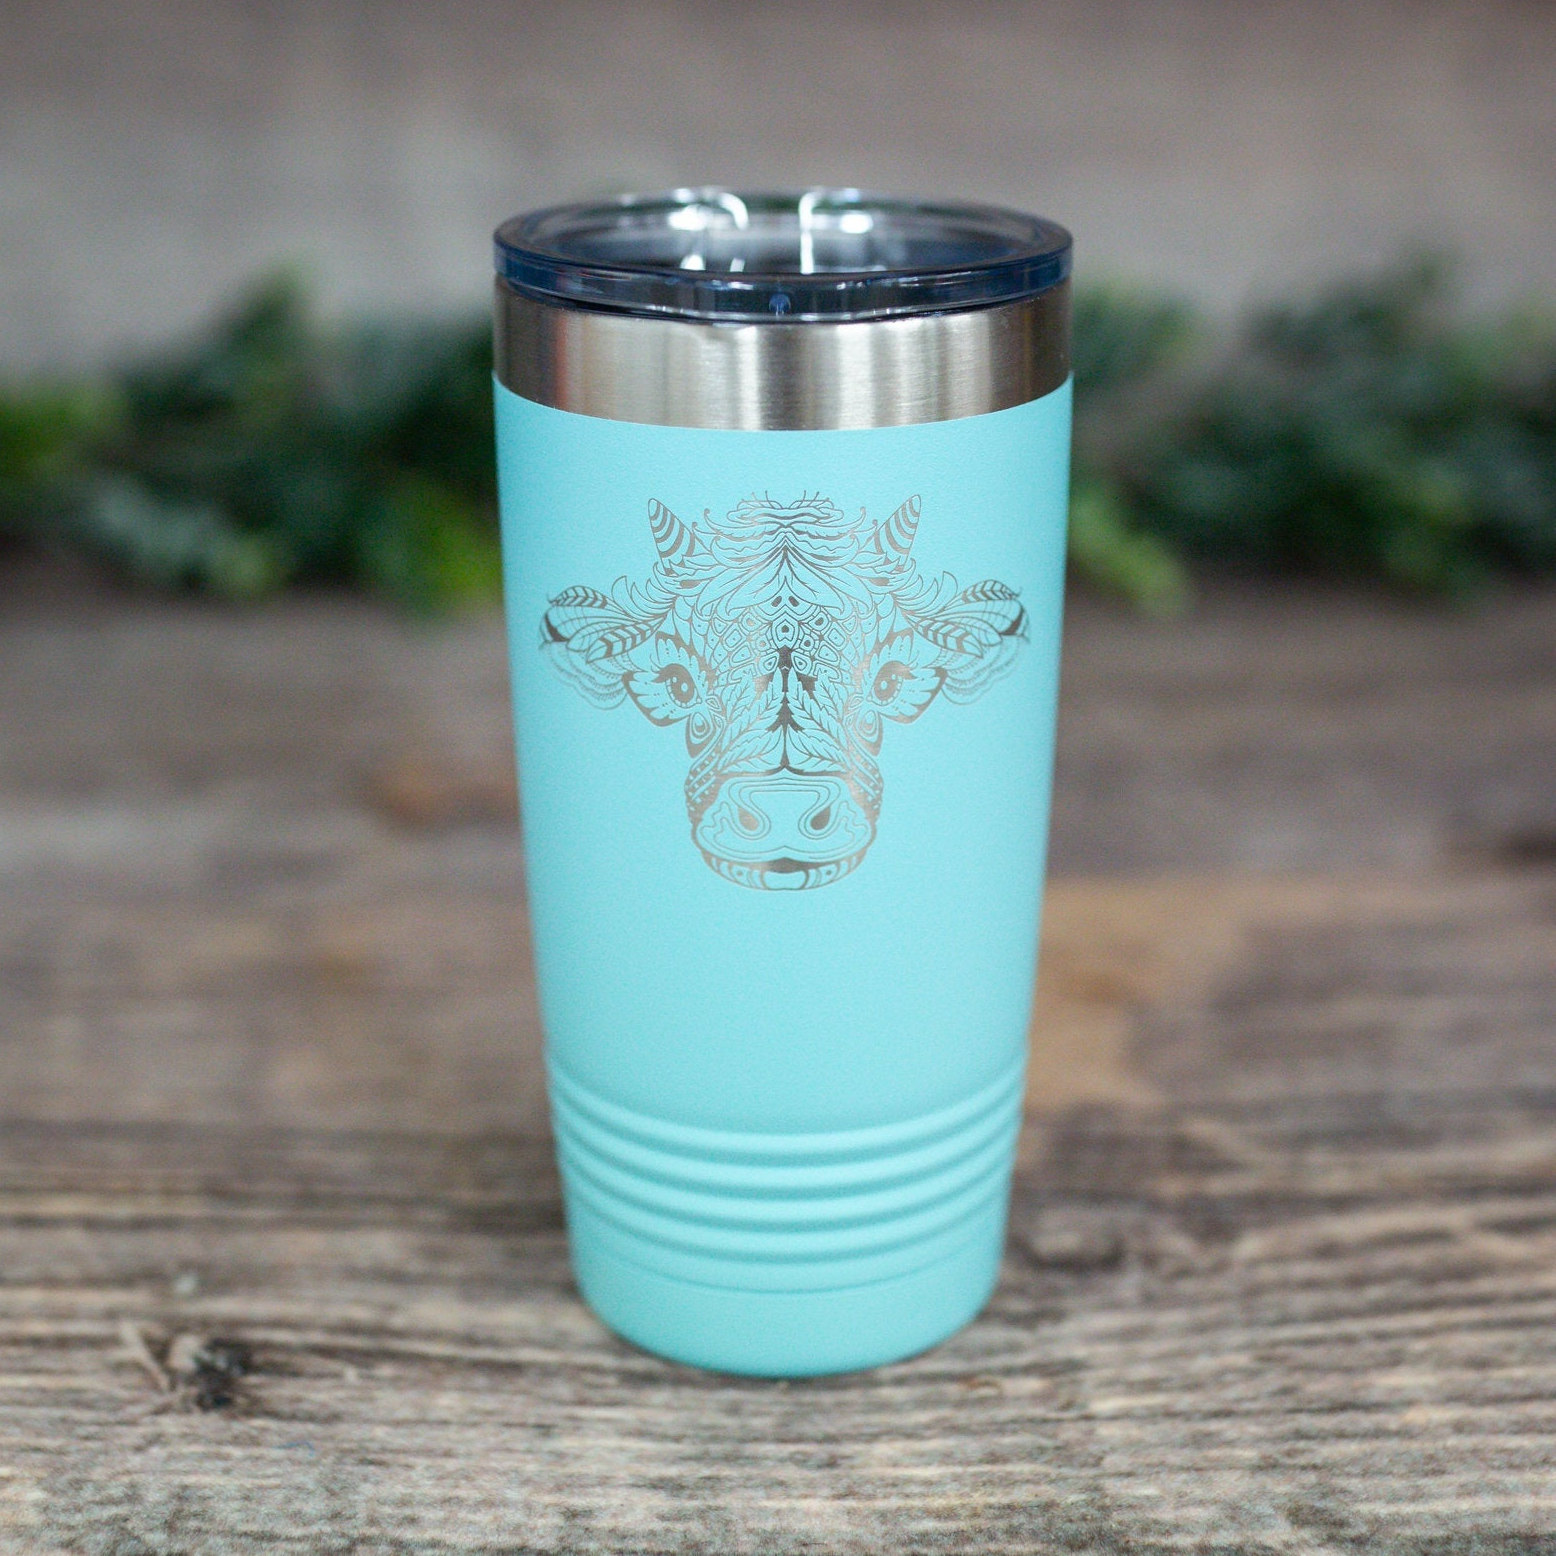 Buy Engraved Because Clients - Engraved Funny and Cute 12oz